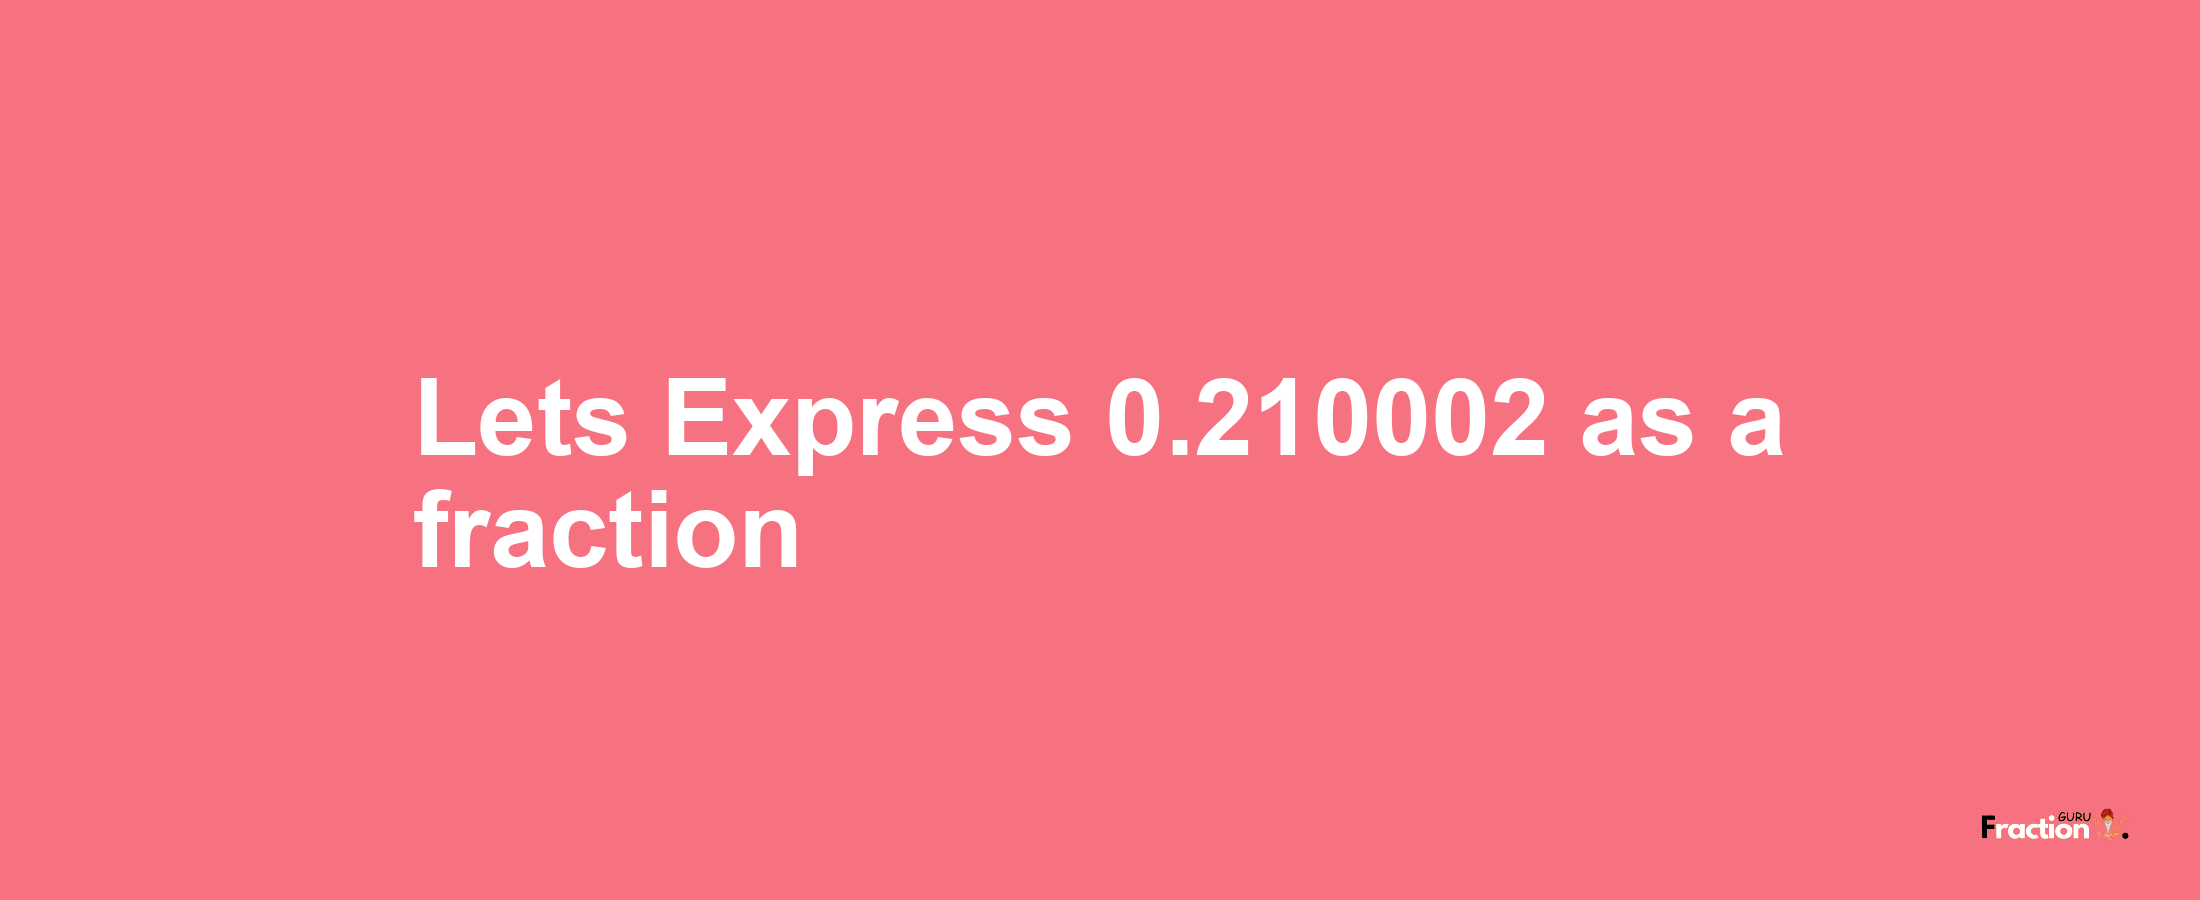 Lets Express 0.210002 as afraction